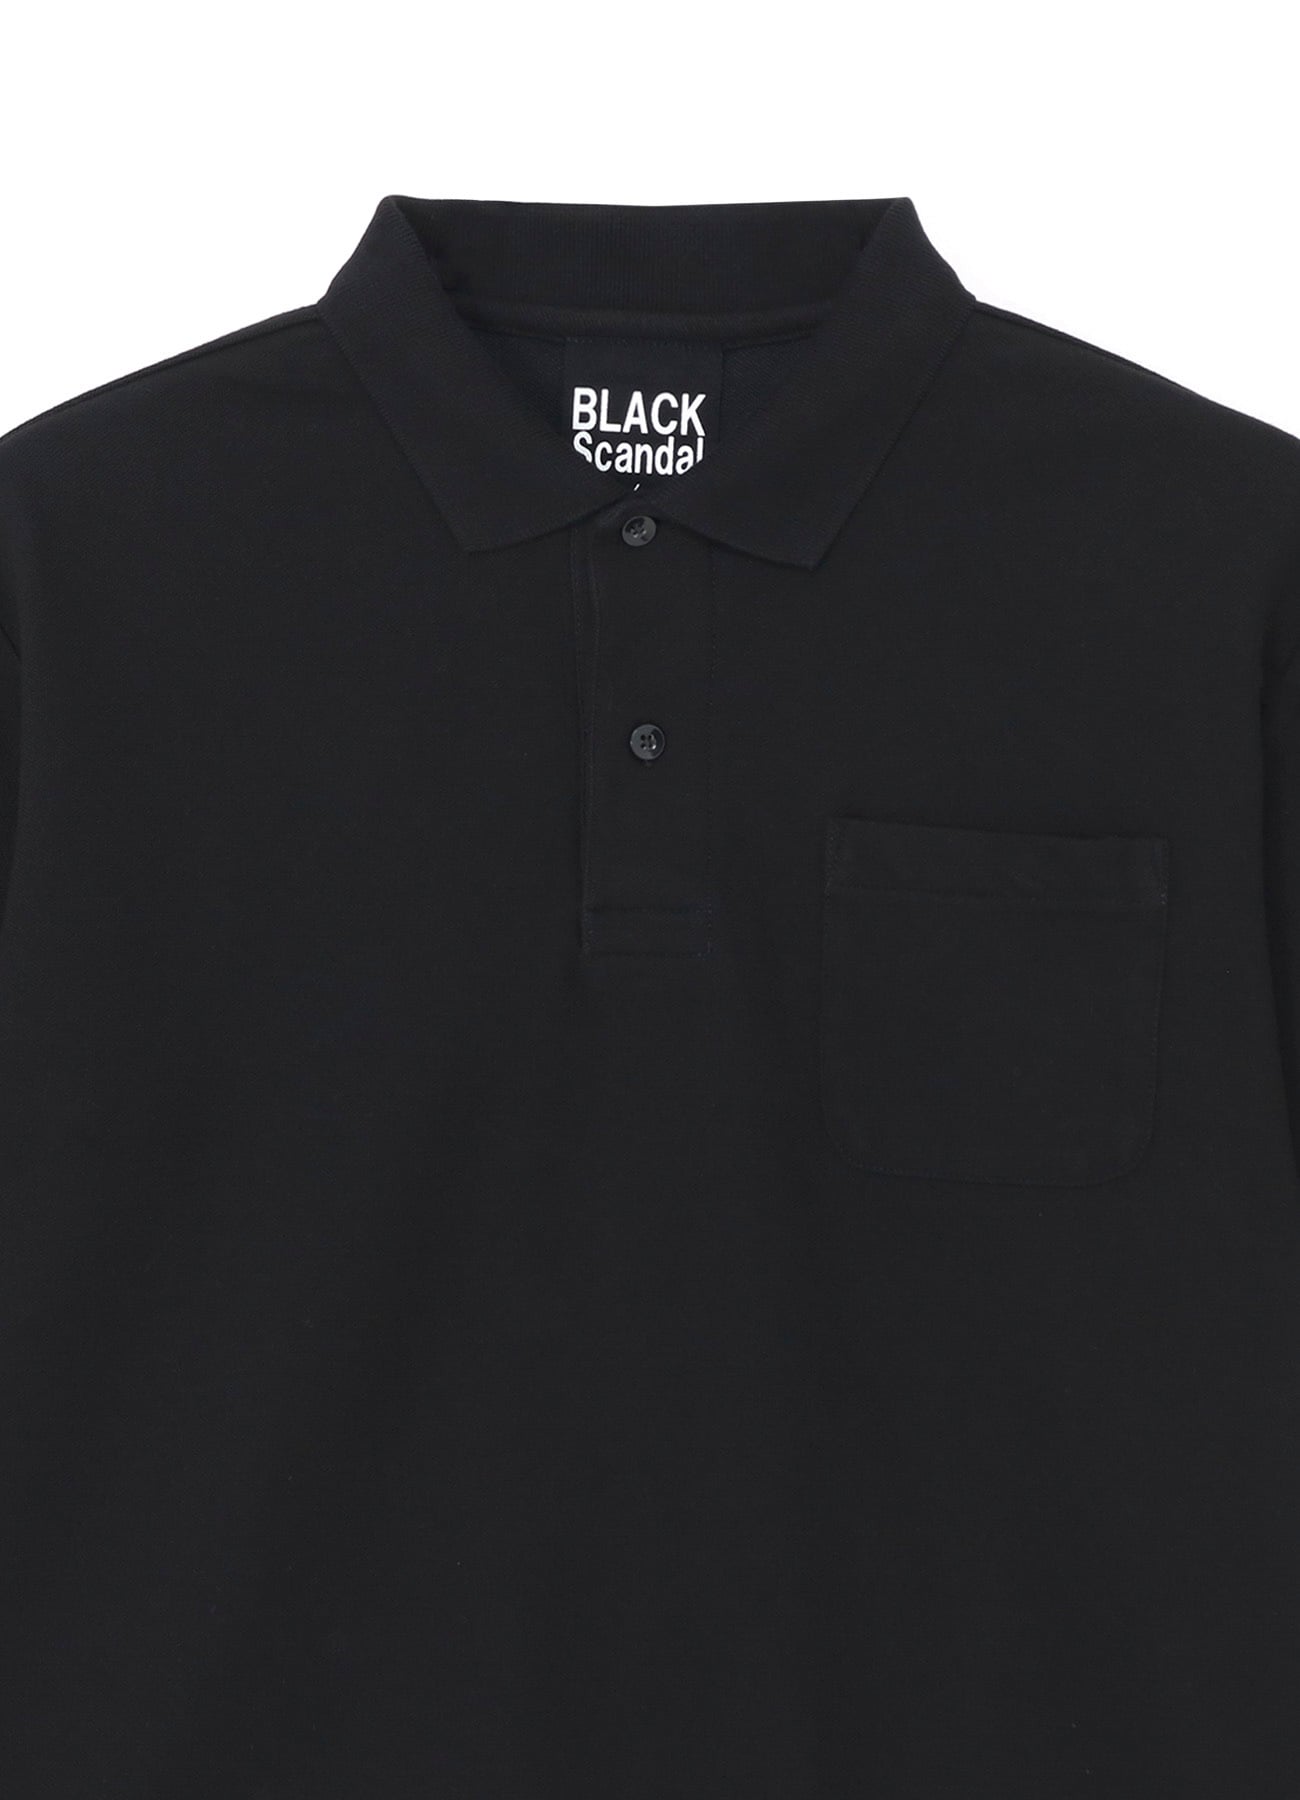 2PIECES PACK SIGNATURE EMBROIDERY POLO SHIRTS (XS Black): Vintage 